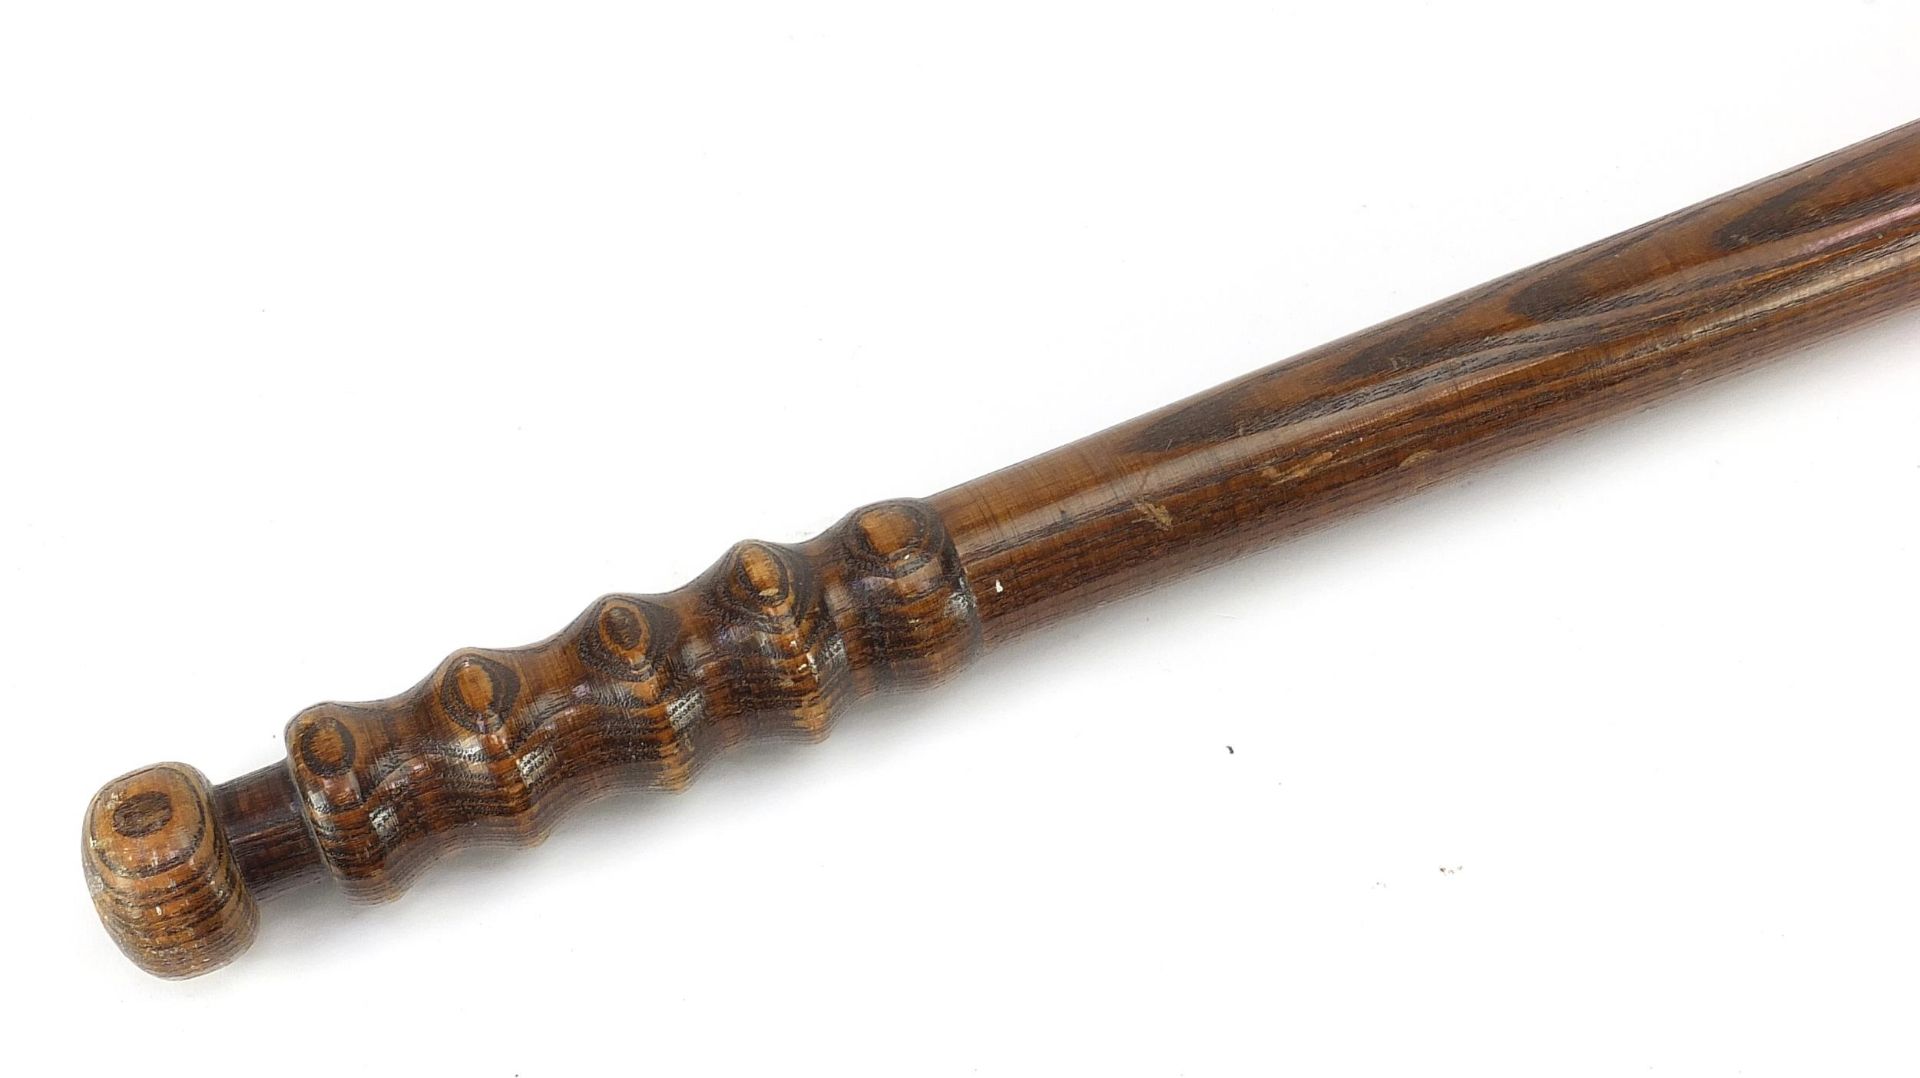 Large turned wood truncheon, 66cm in length - Image 5 of 5